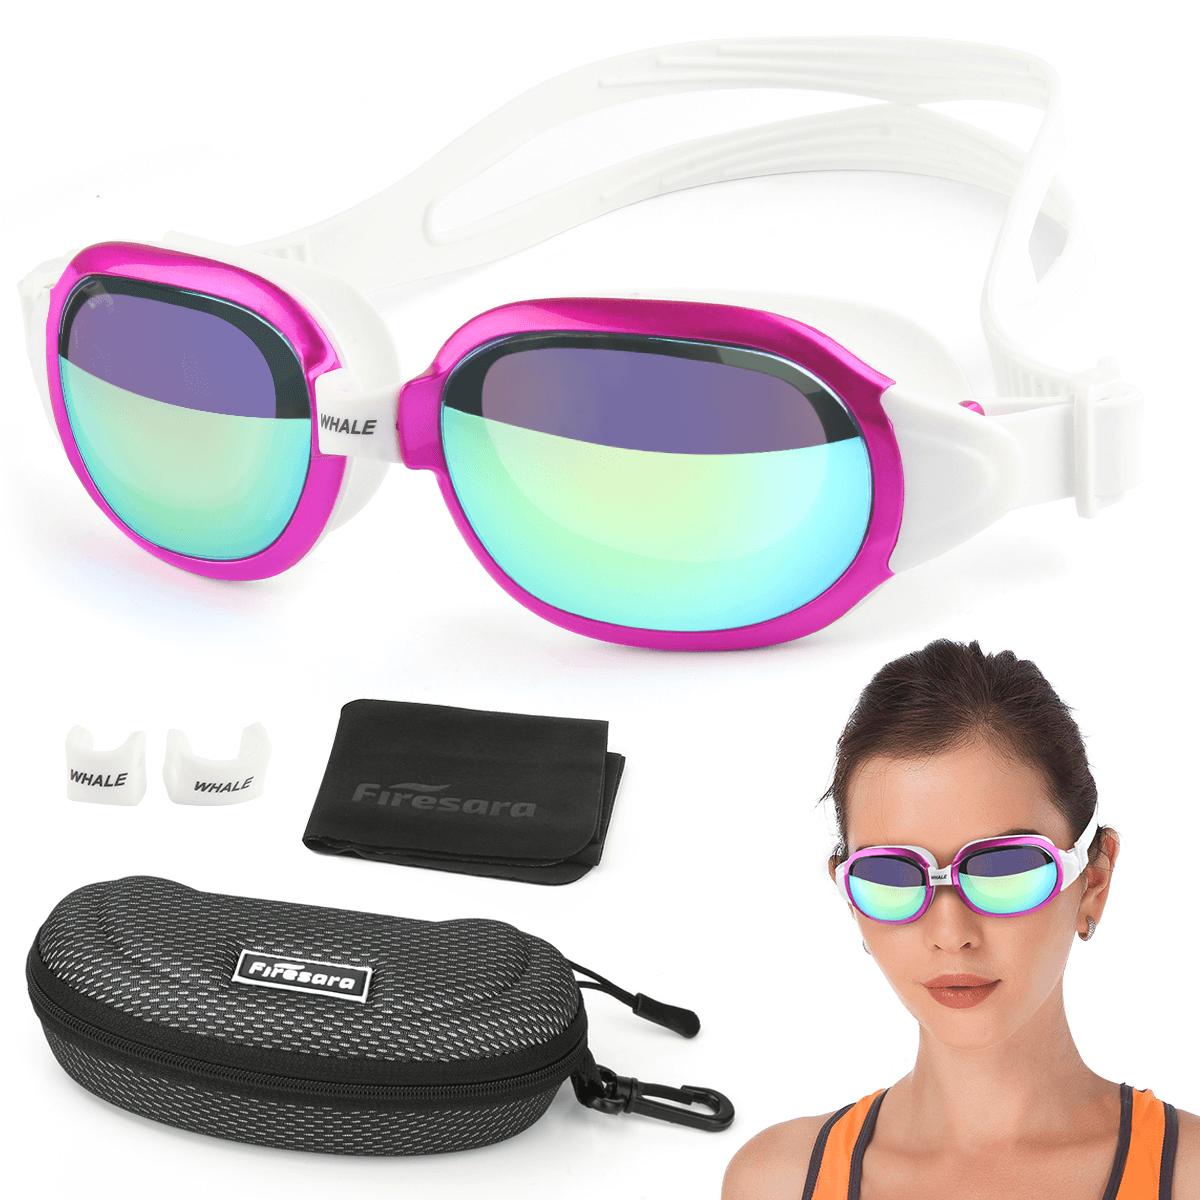 swimming goggles online